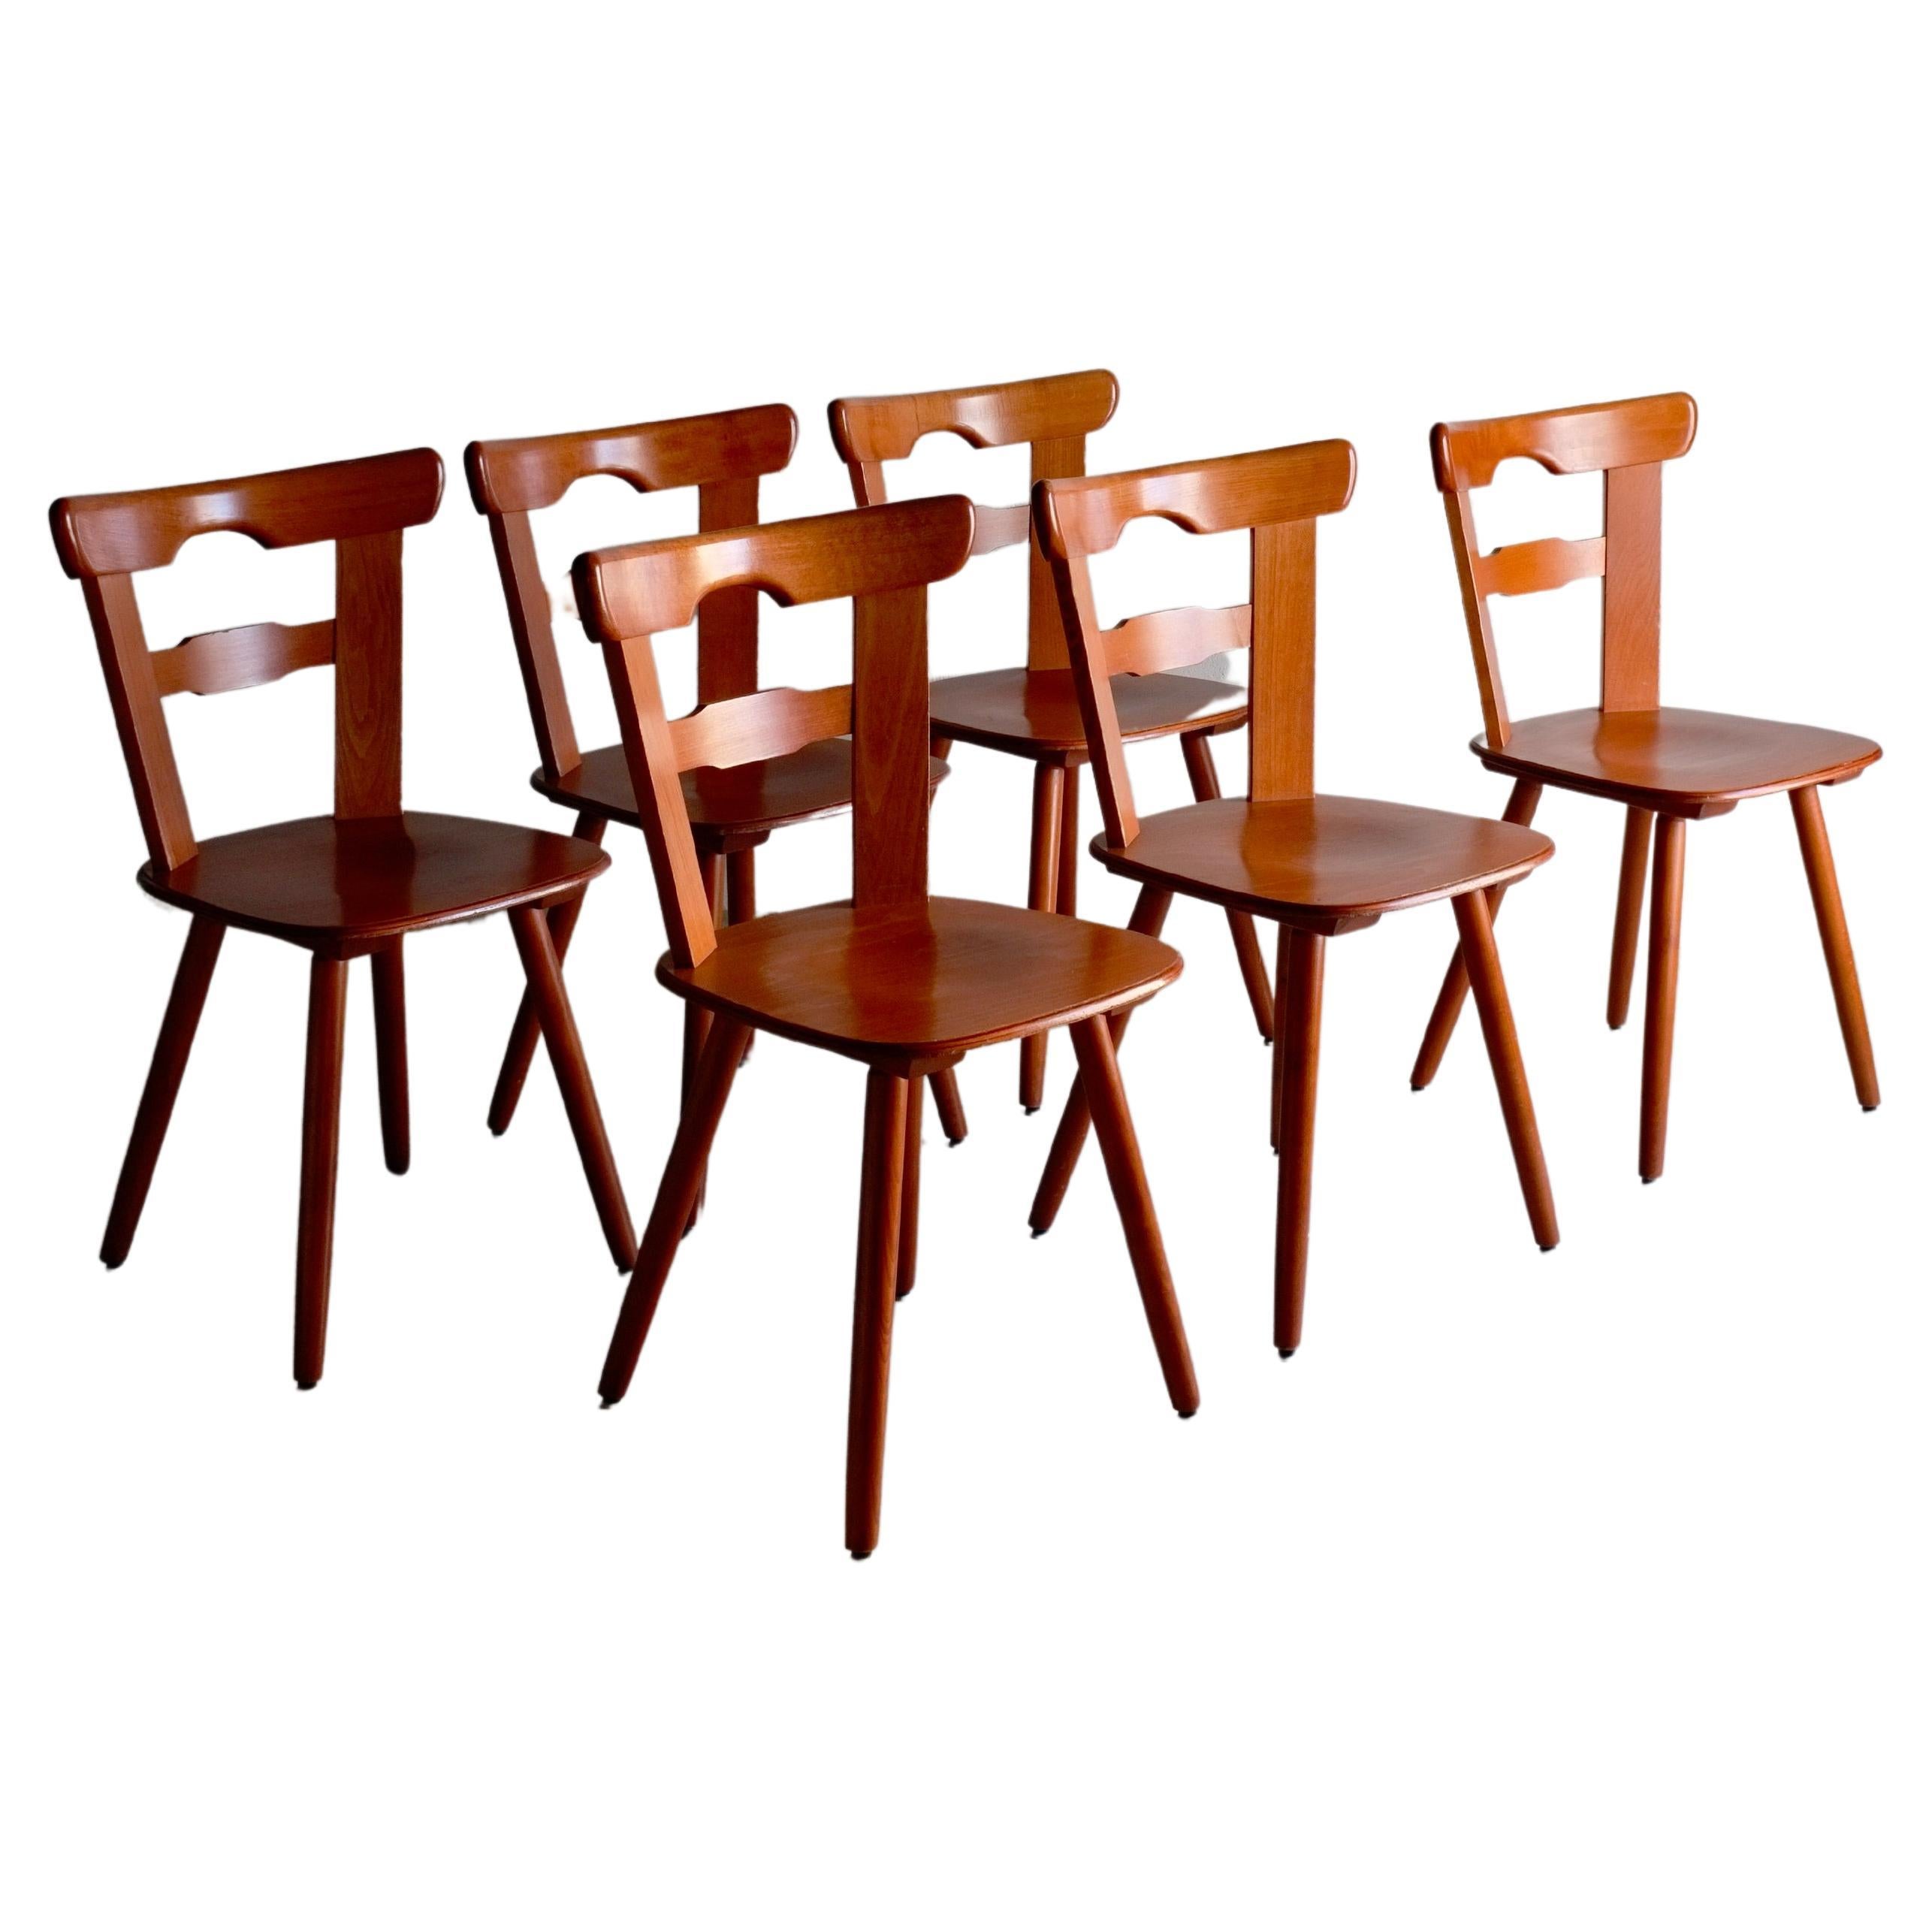 6 Carved Wood Dining Chairs, Netherlands, 1970s